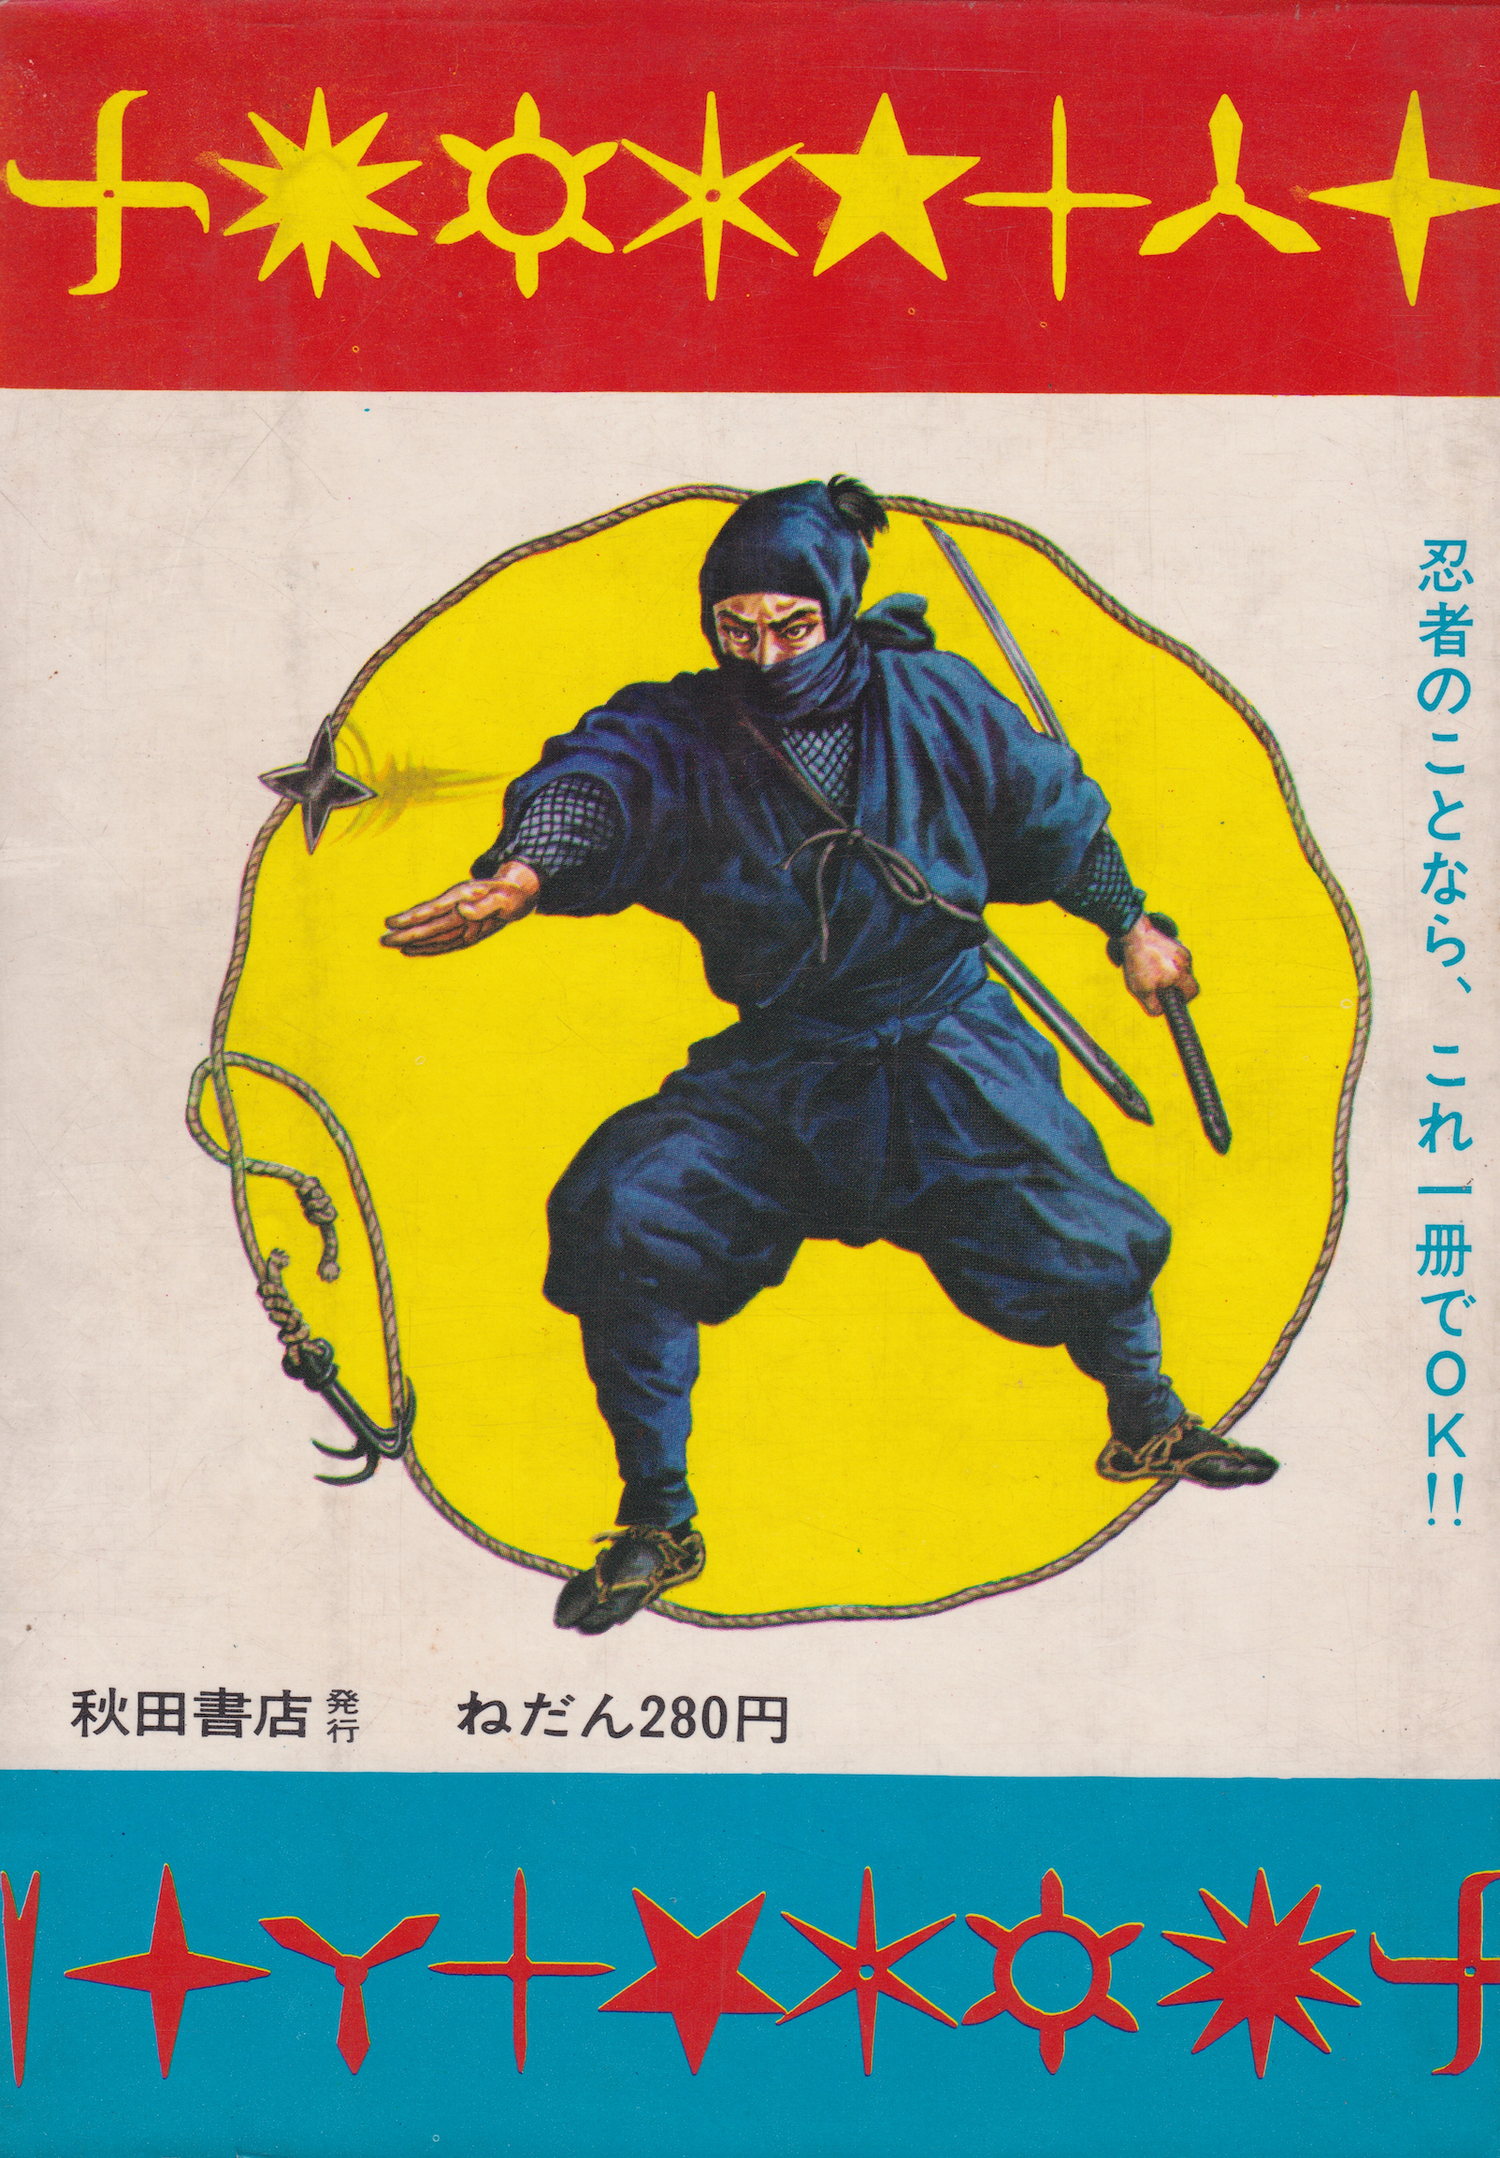 Ninja Pictorial Book for Boys by Masaaki Hatsumi (Preowned)